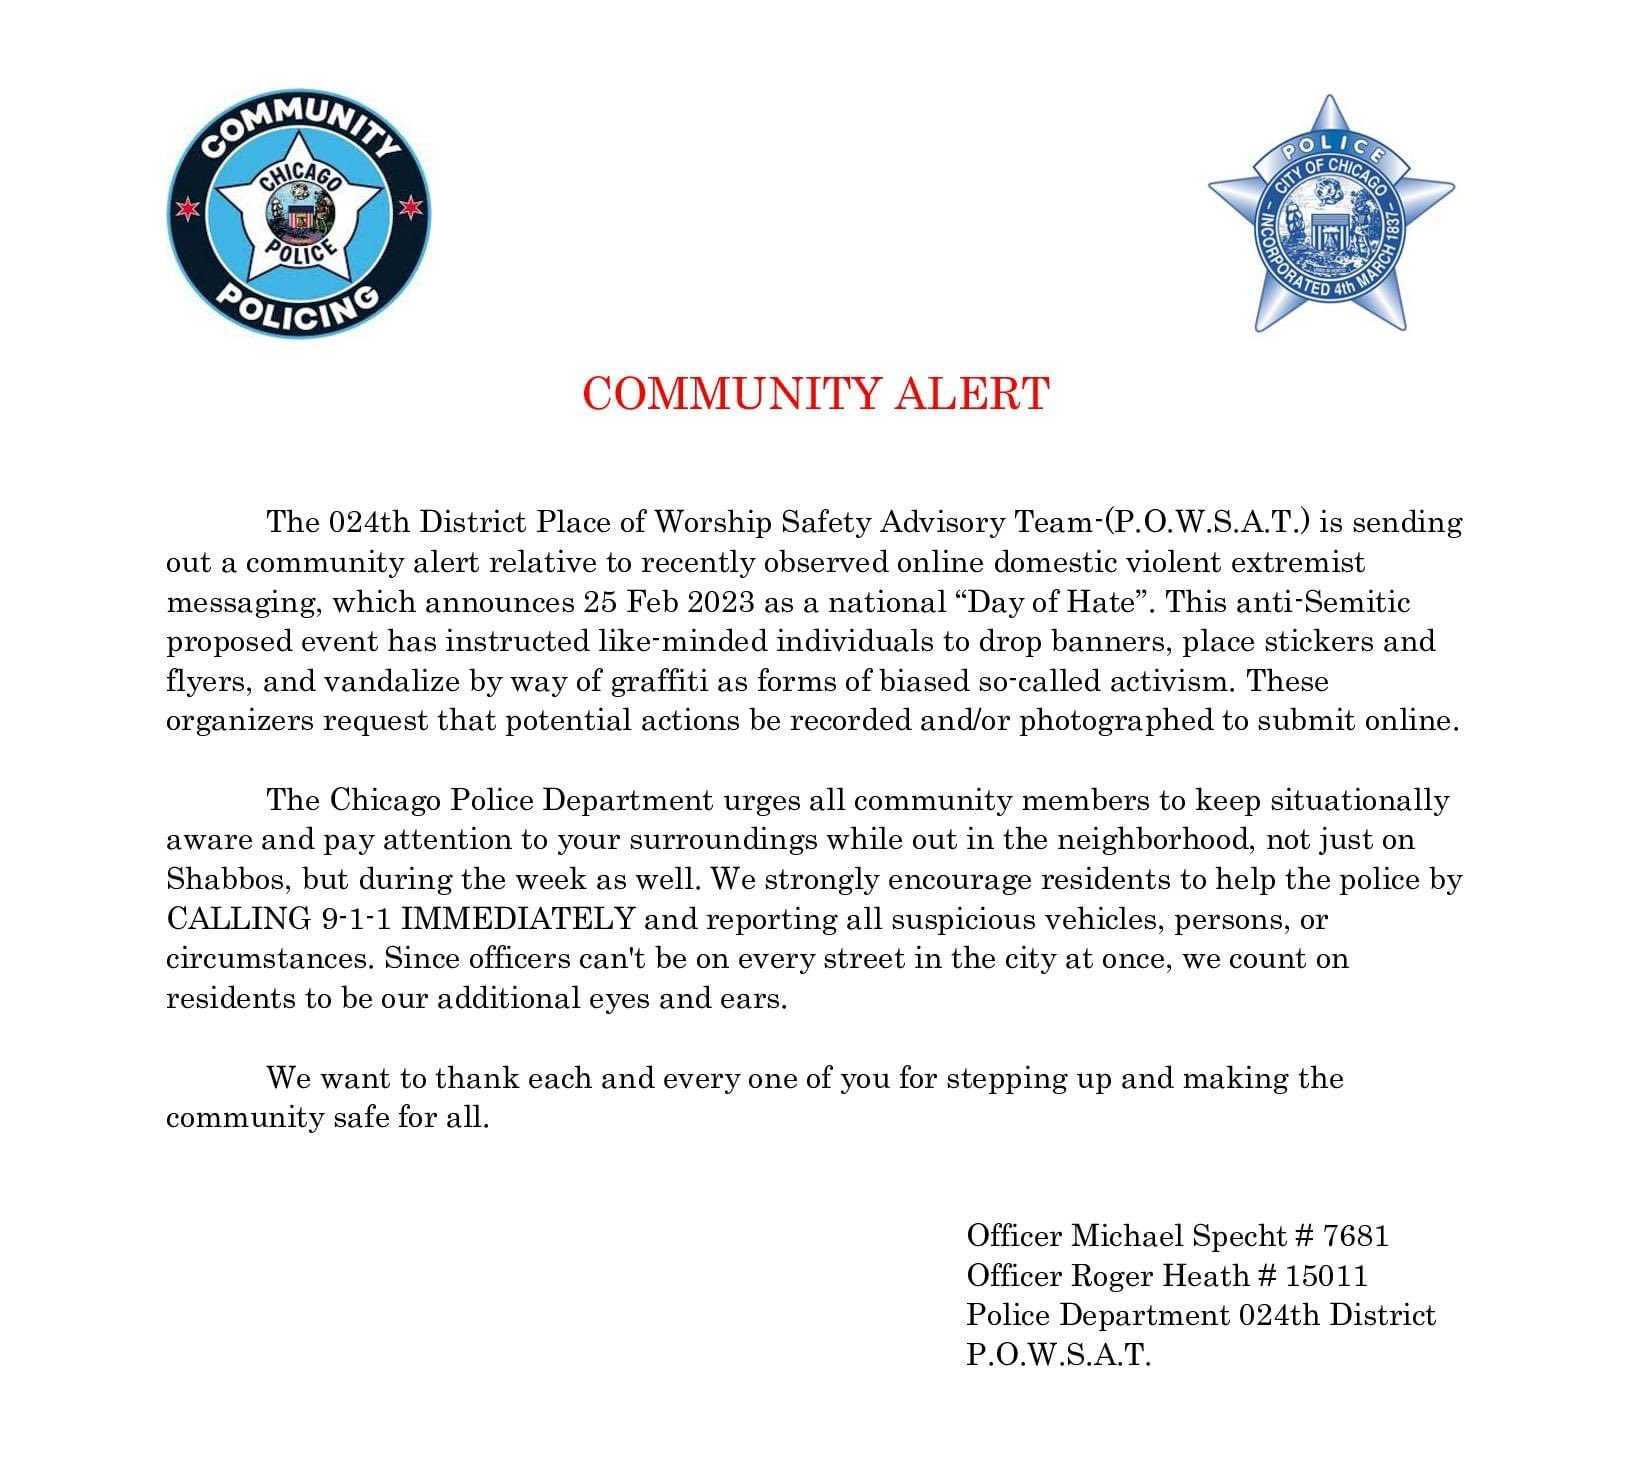 Community Alert from 24th Chicago Police District